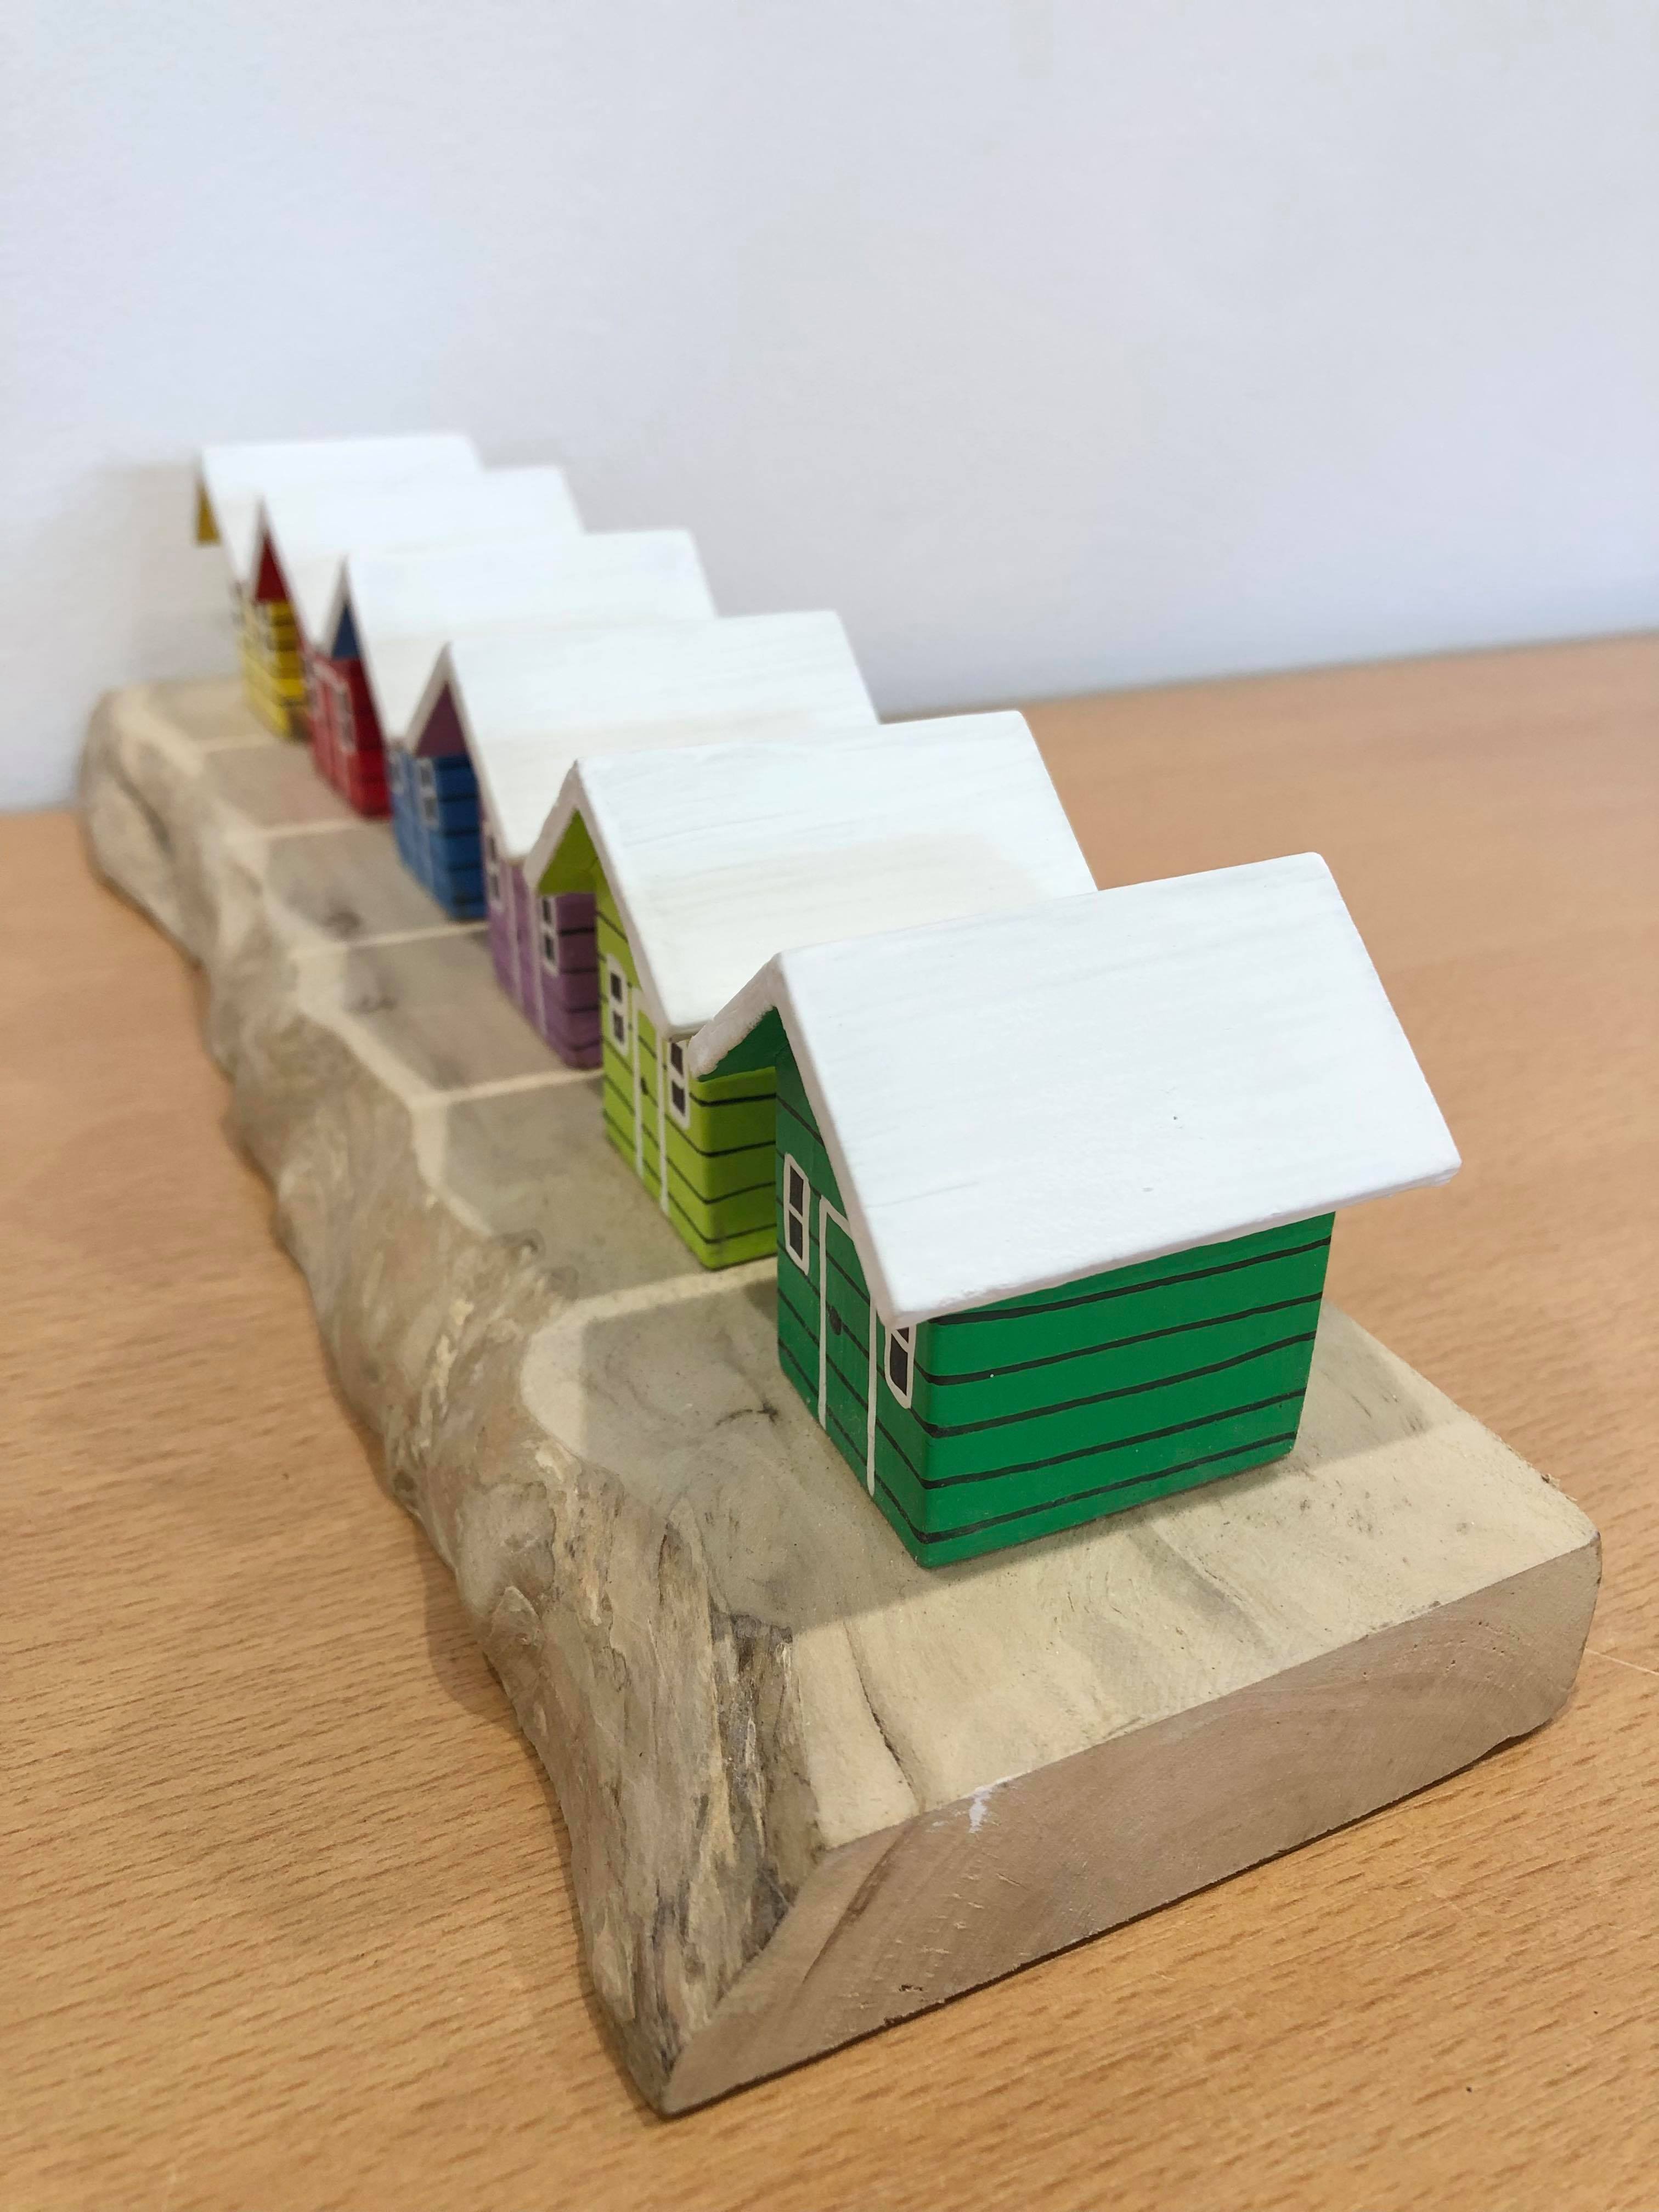 Coloured Beach Houses On Carved Light Brown Wood